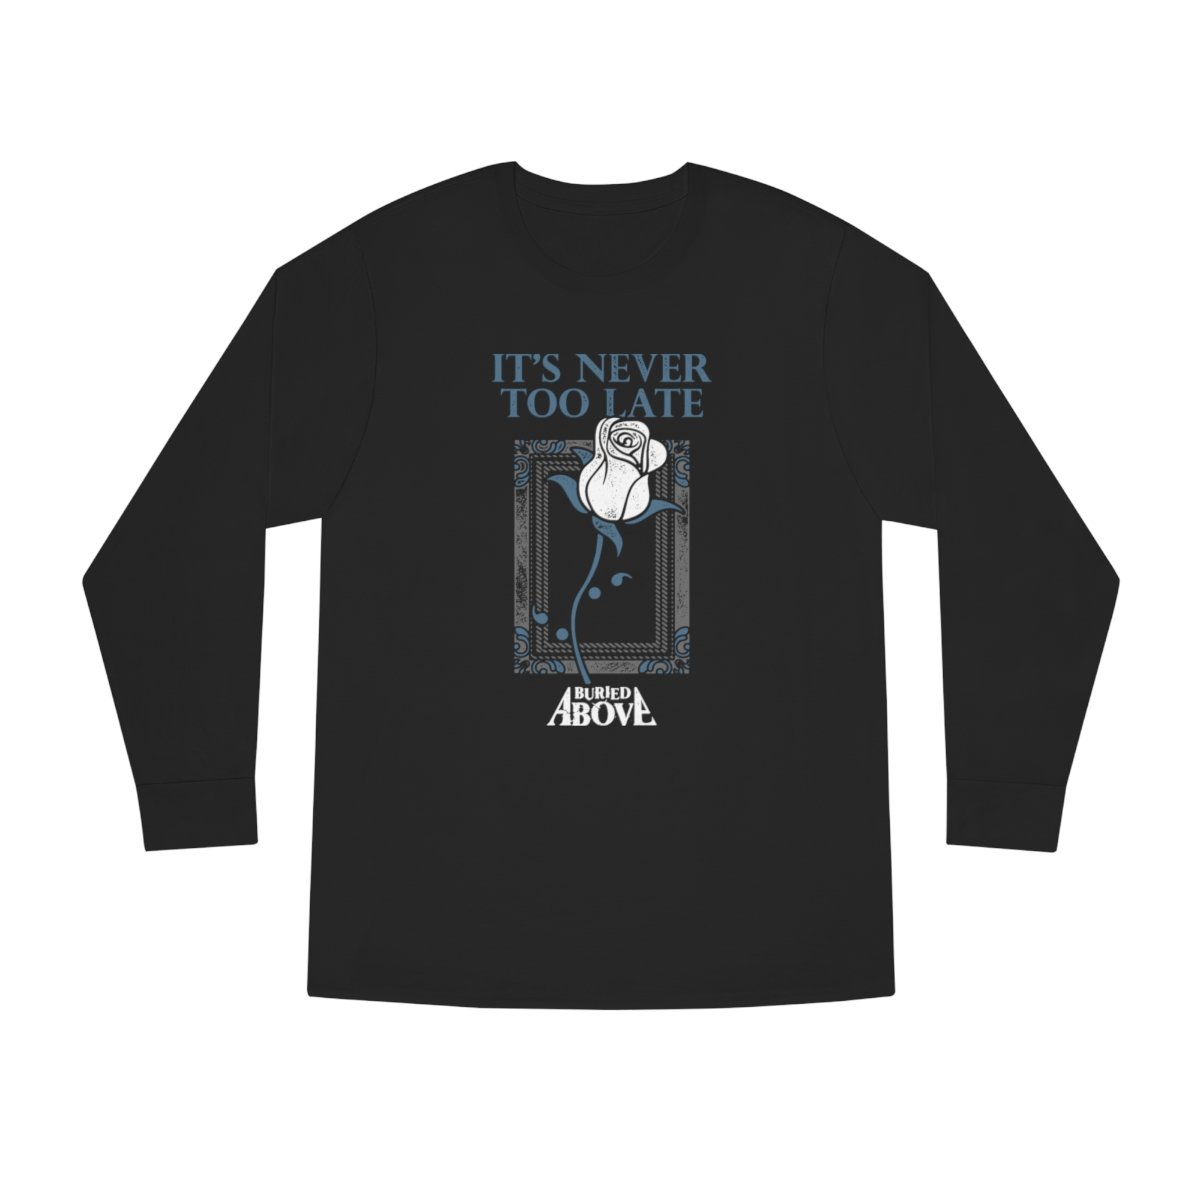 Buried Above – It’s Never Too Late Long Sleeve Crewneck Tshirt